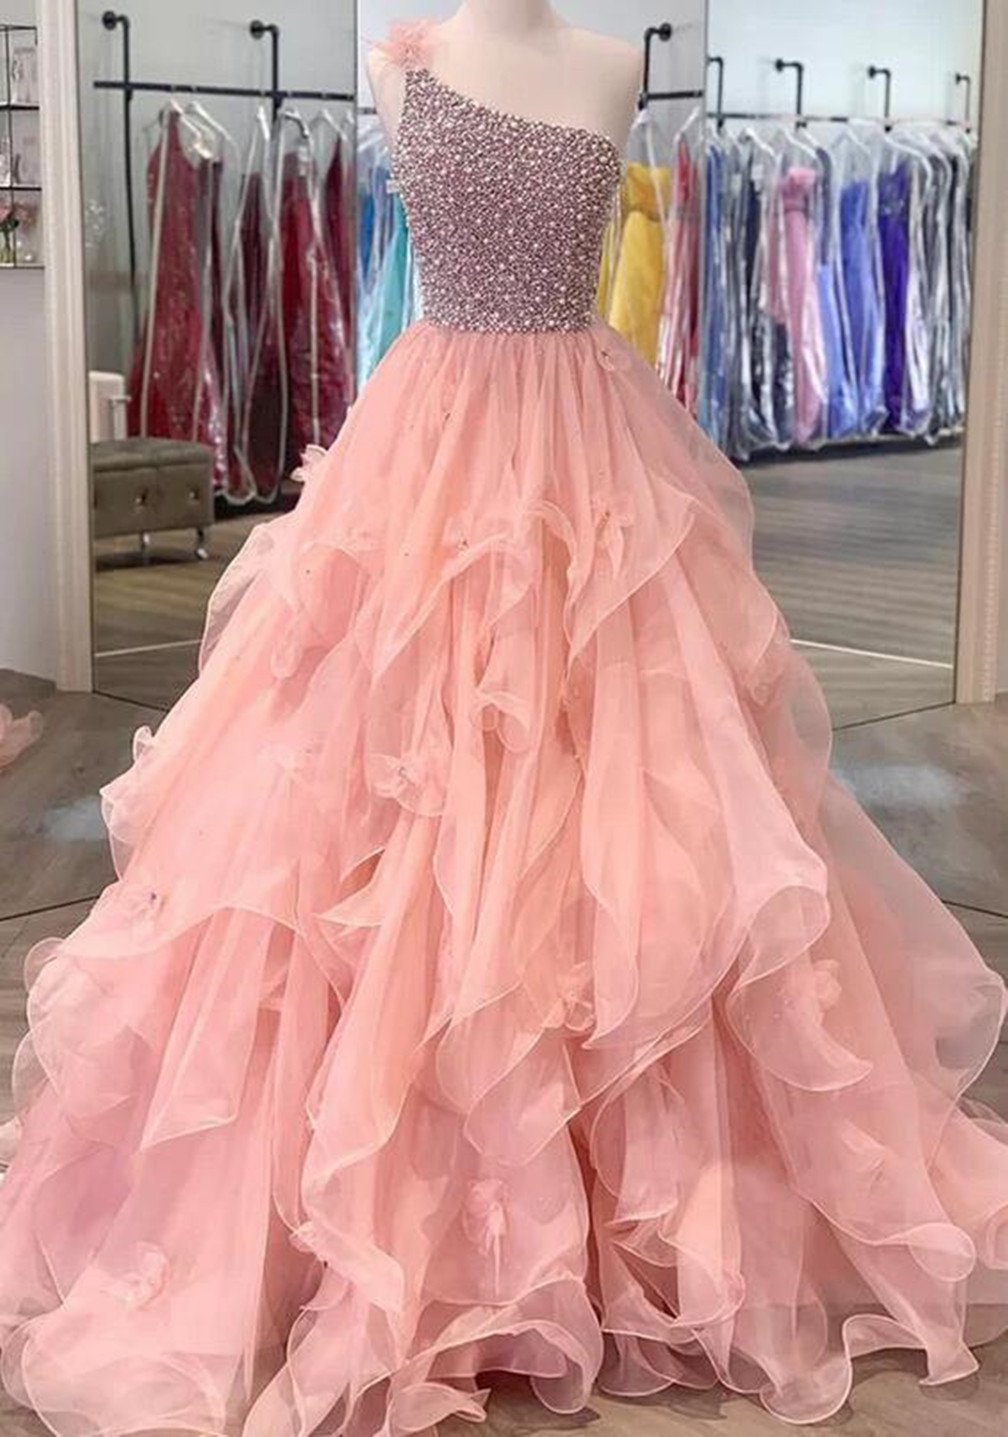 Women A-line Princess Beaded Prom Dresses Long One Shoulder Evening Gowns Tulle Formal Party Dress Yp007